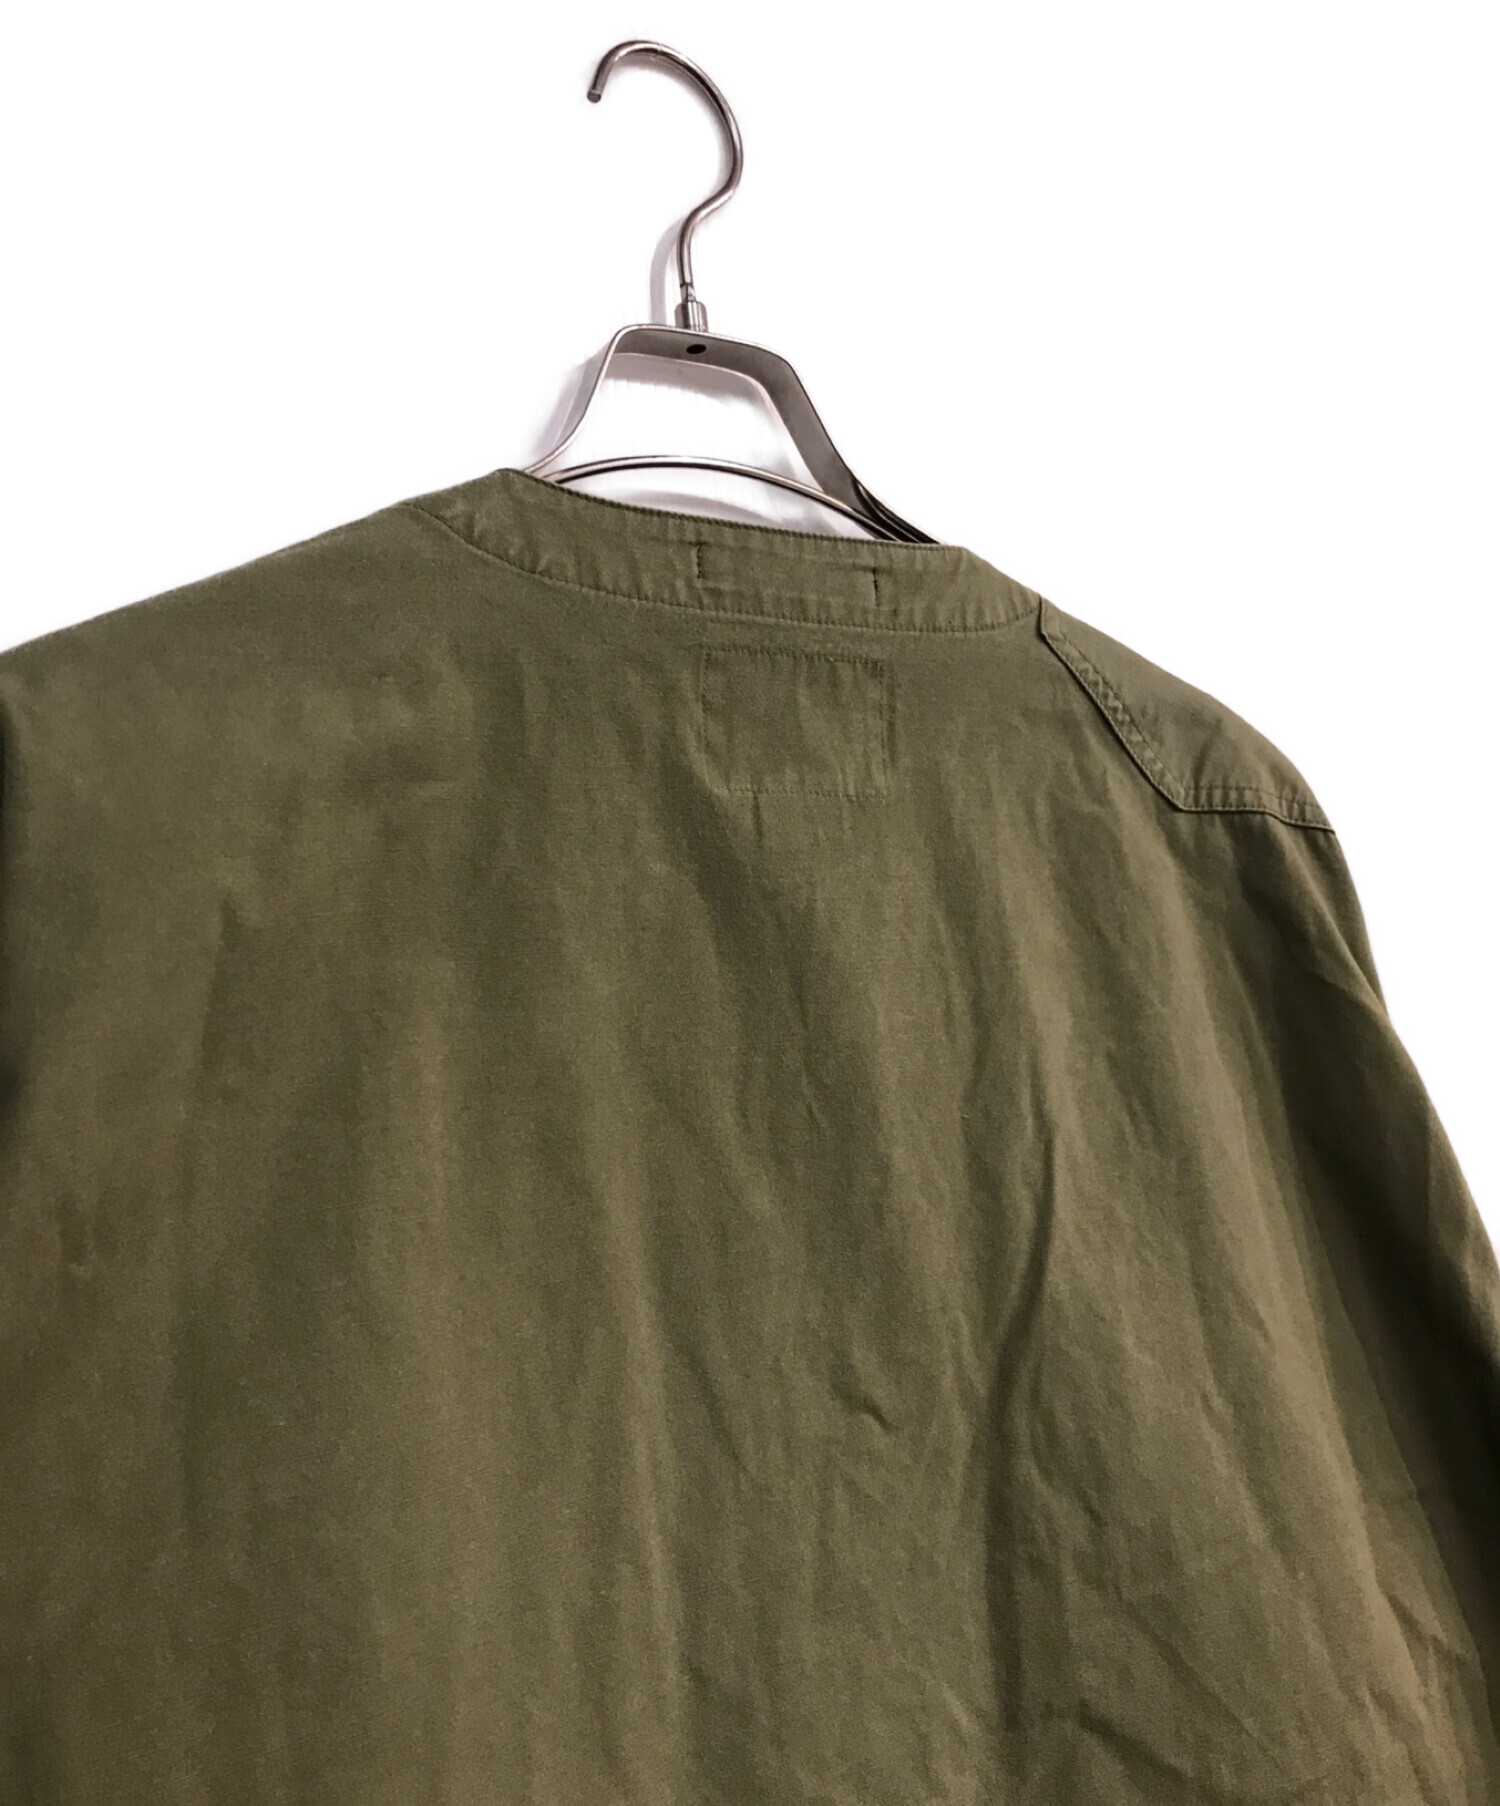 WTAPS (ダブルタップス) SCOUT/LS/COTTON.WEATHER　202WVDT-SHM02 カーキ サイズ:02